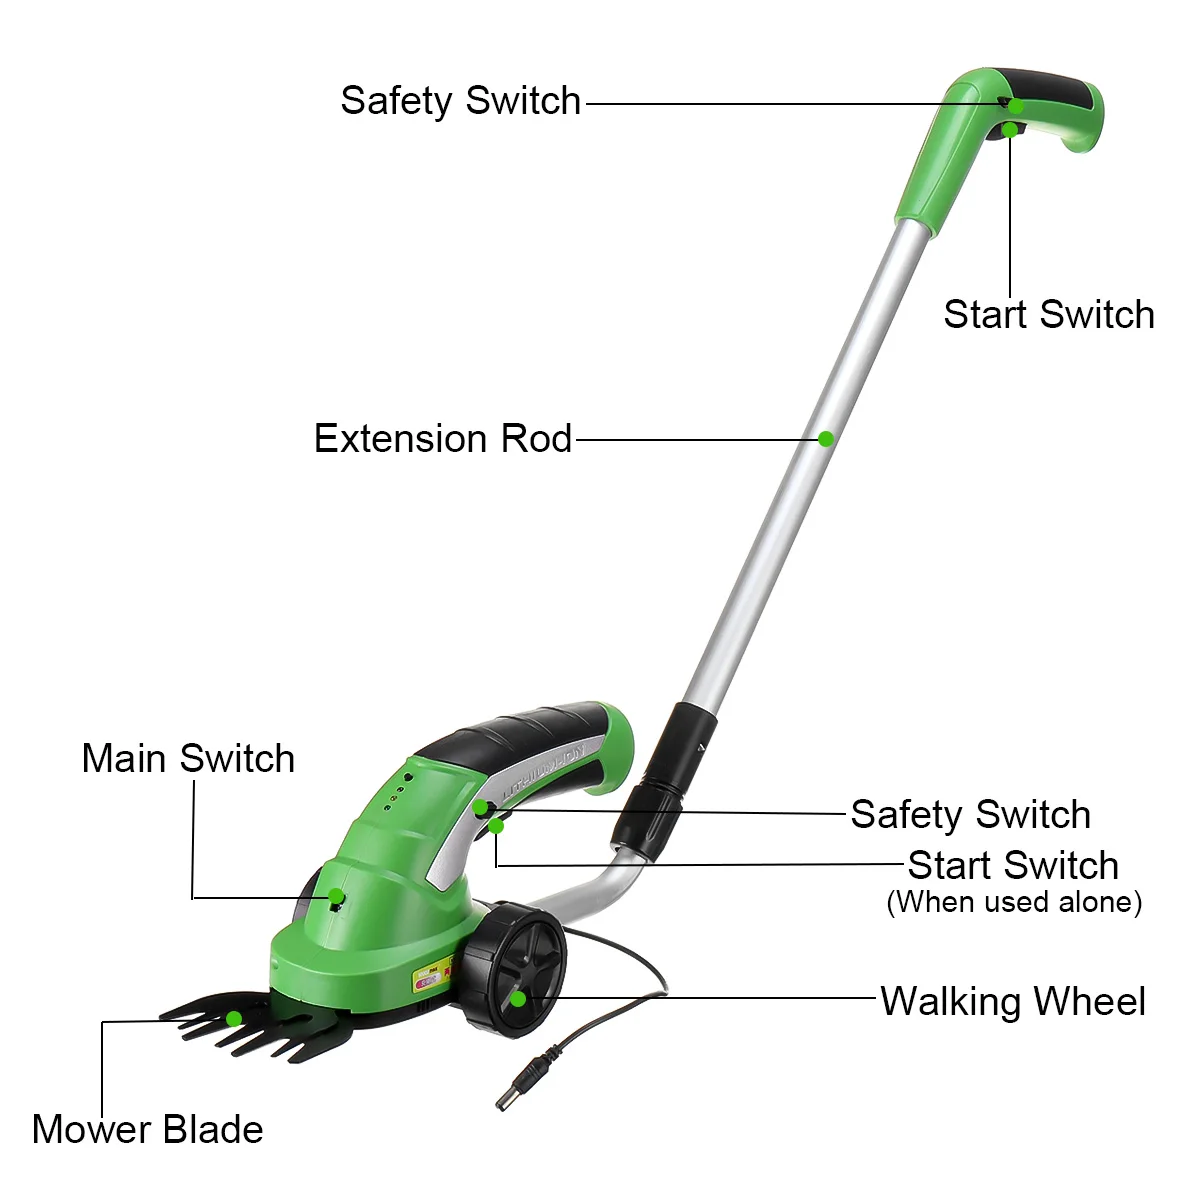 7.2V Electric Trimmer 2 in 1 Lithium-ion Cordless Garden Tools Hedge Trimmer Rechargeable Hedge Trimmers for Grass Shrubbery